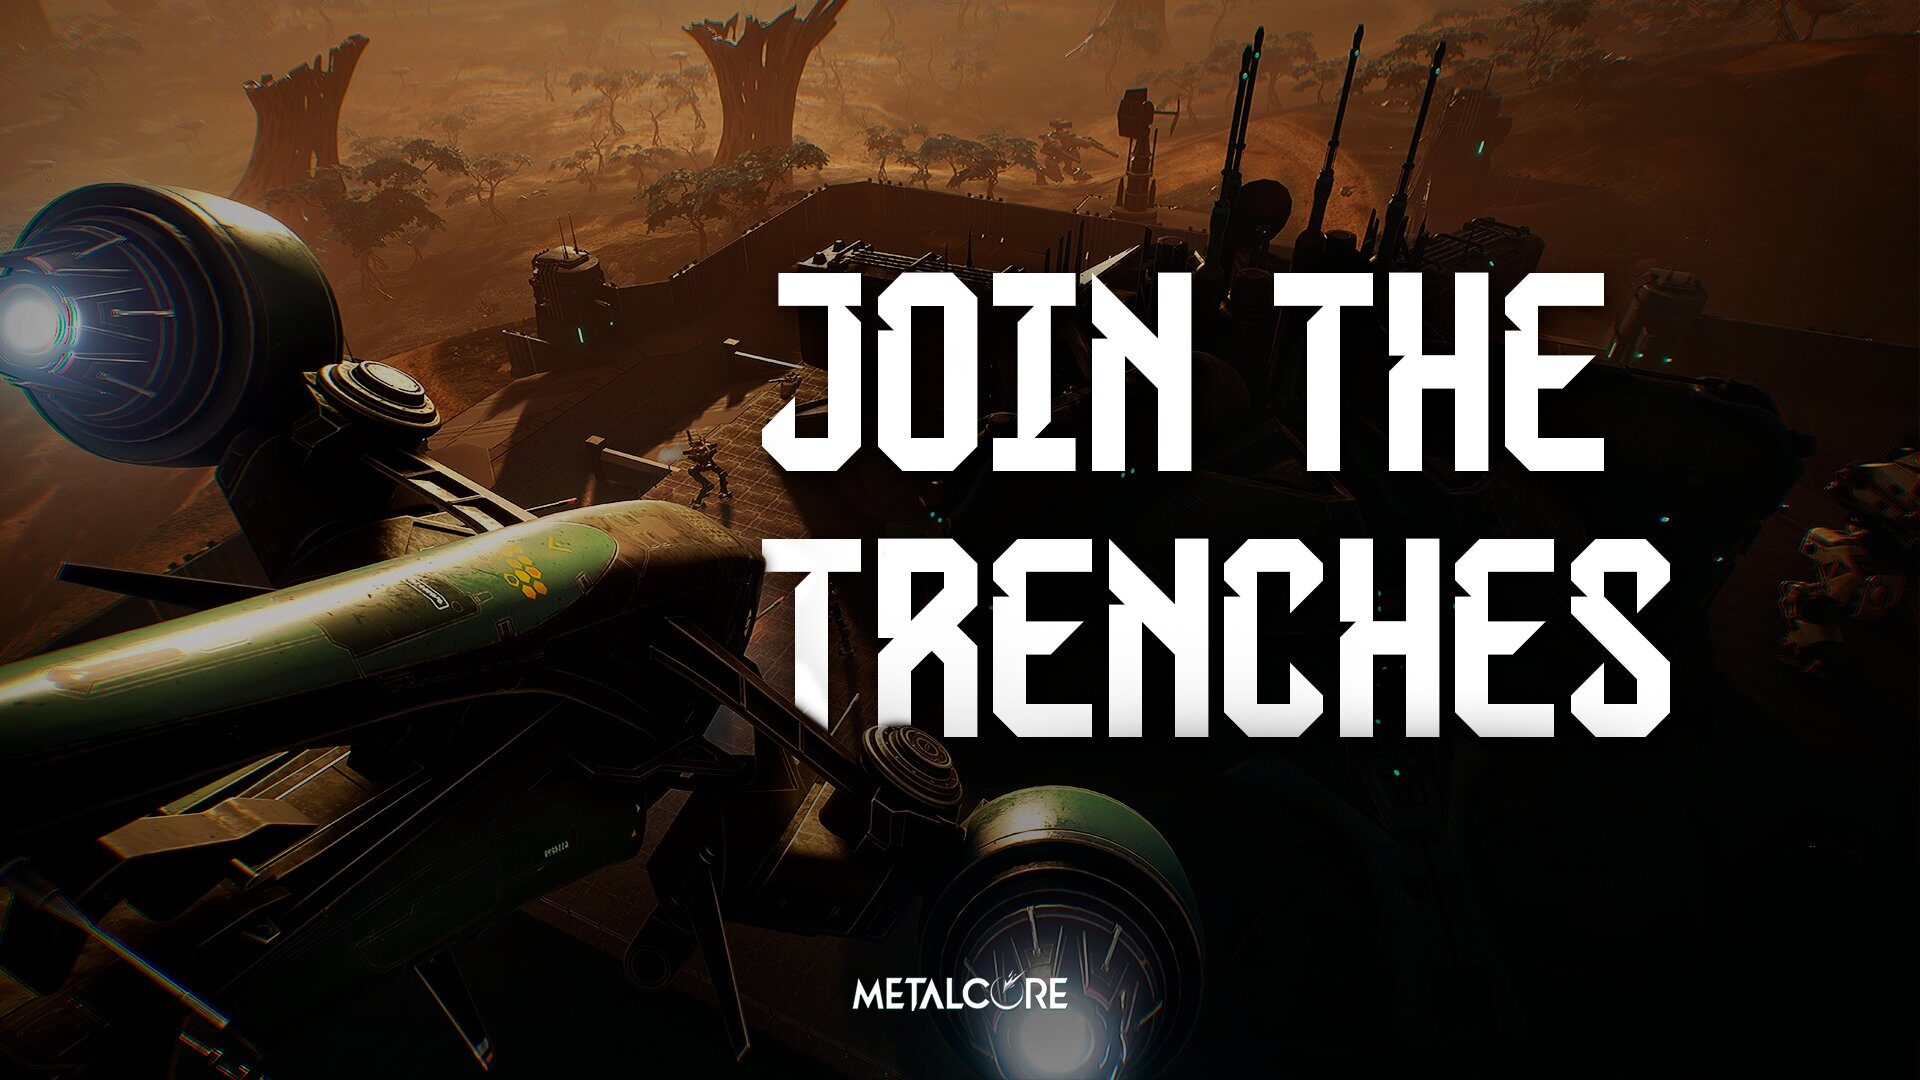 Play and Earn with MetalCore Closed Beta 2